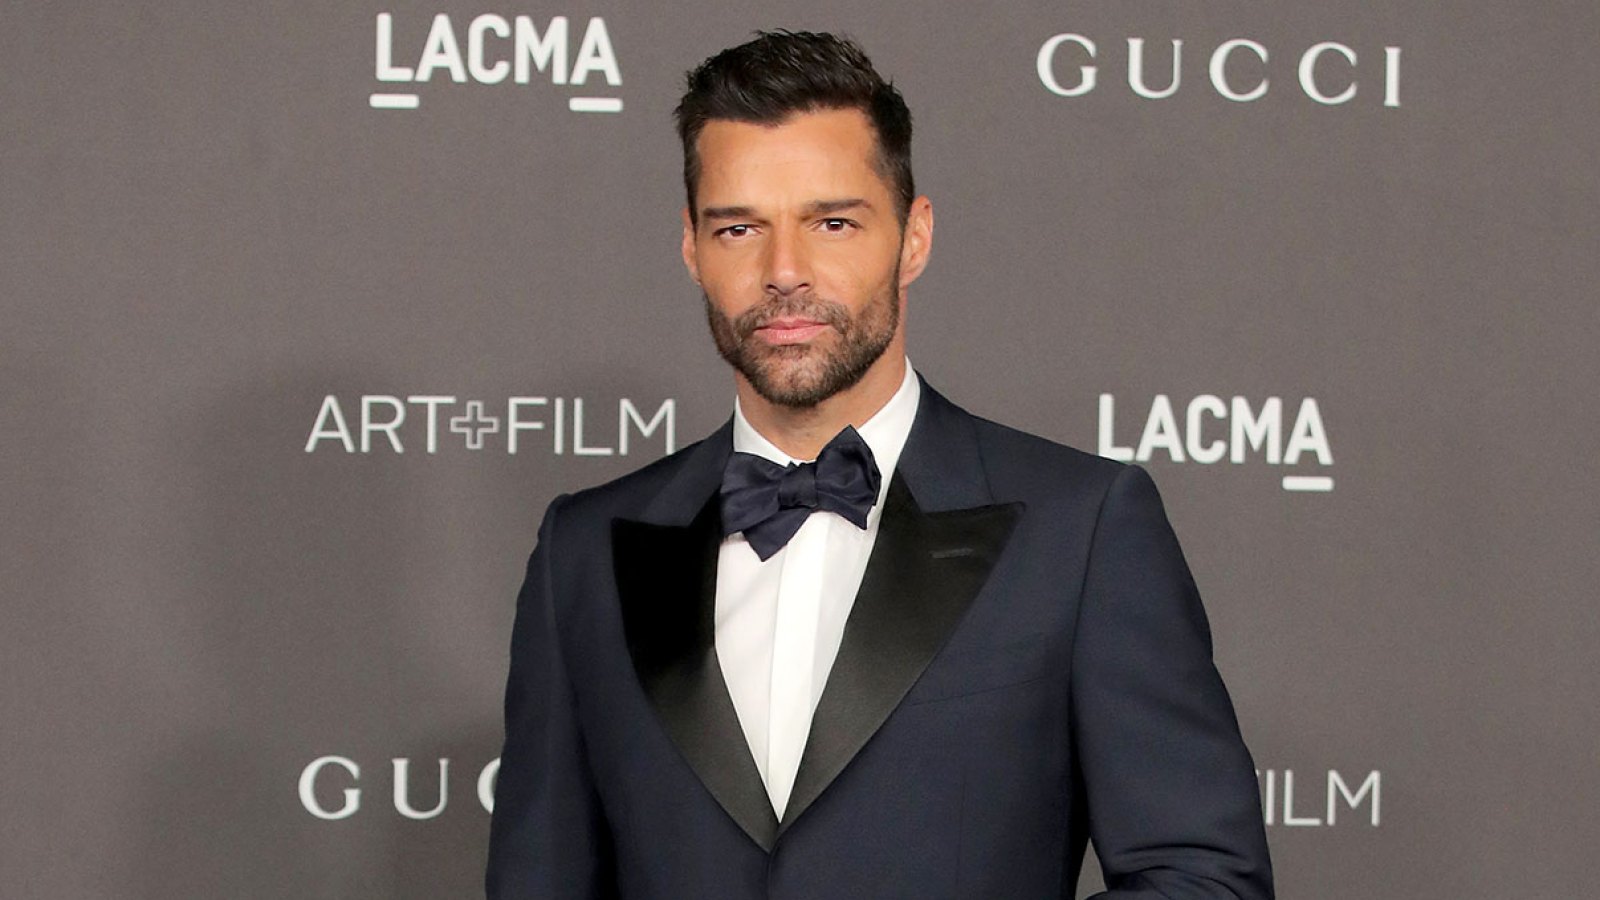 Ricky Martin Testifies in Court After Nephew's Alleged Sexual Relationship Claims